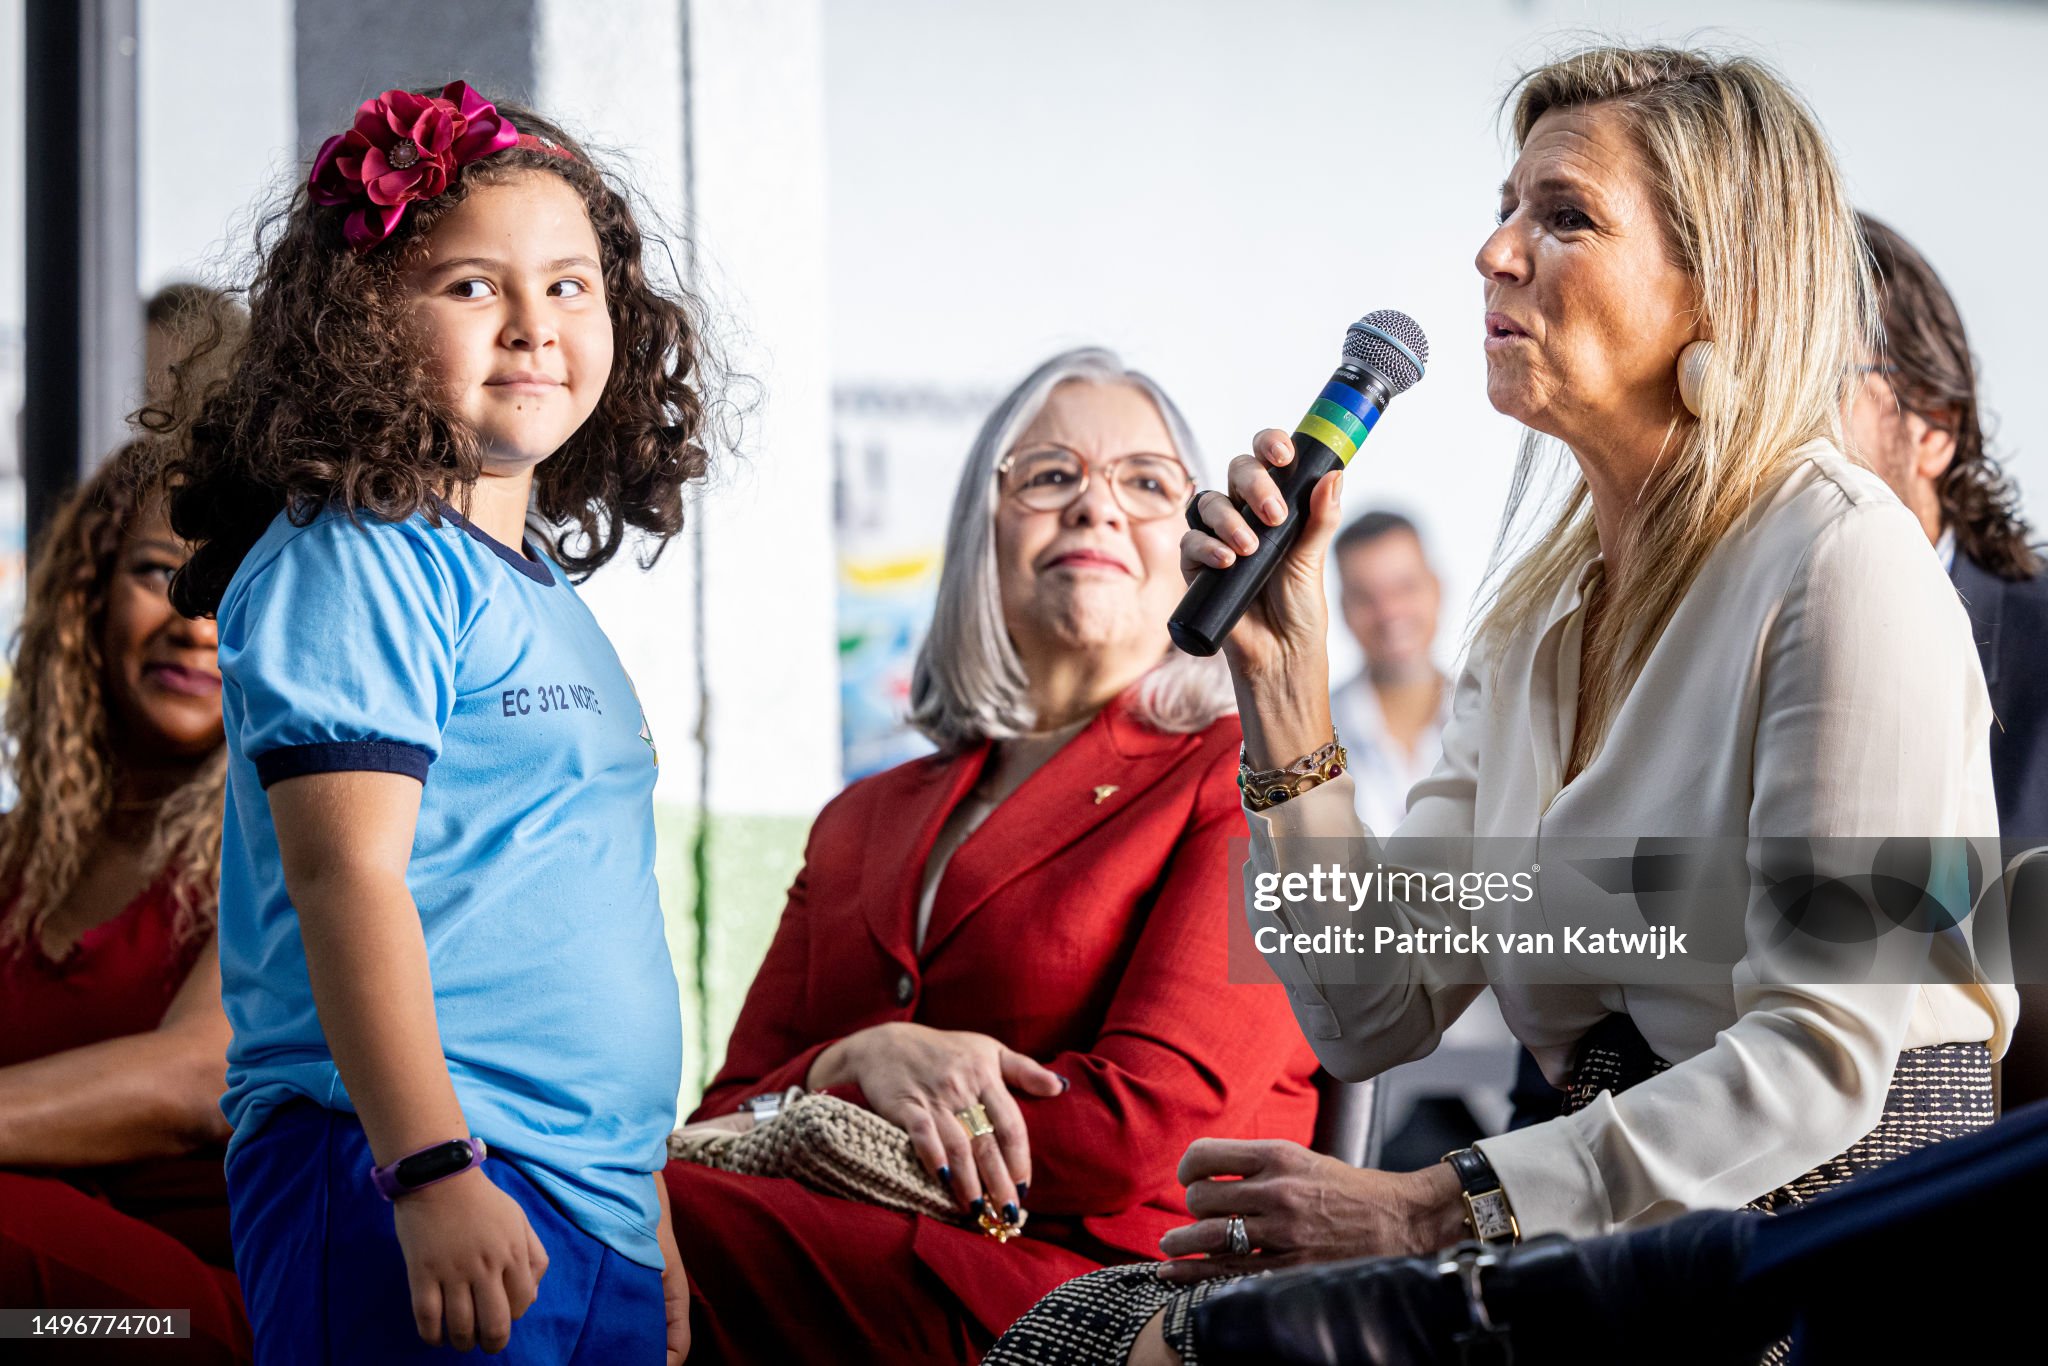 CASA REAL HOLANDESA - Página 93 Queen-maxima-of-the-netherlands-visits-321-norte-school-for-a-financial-education-lesson-on